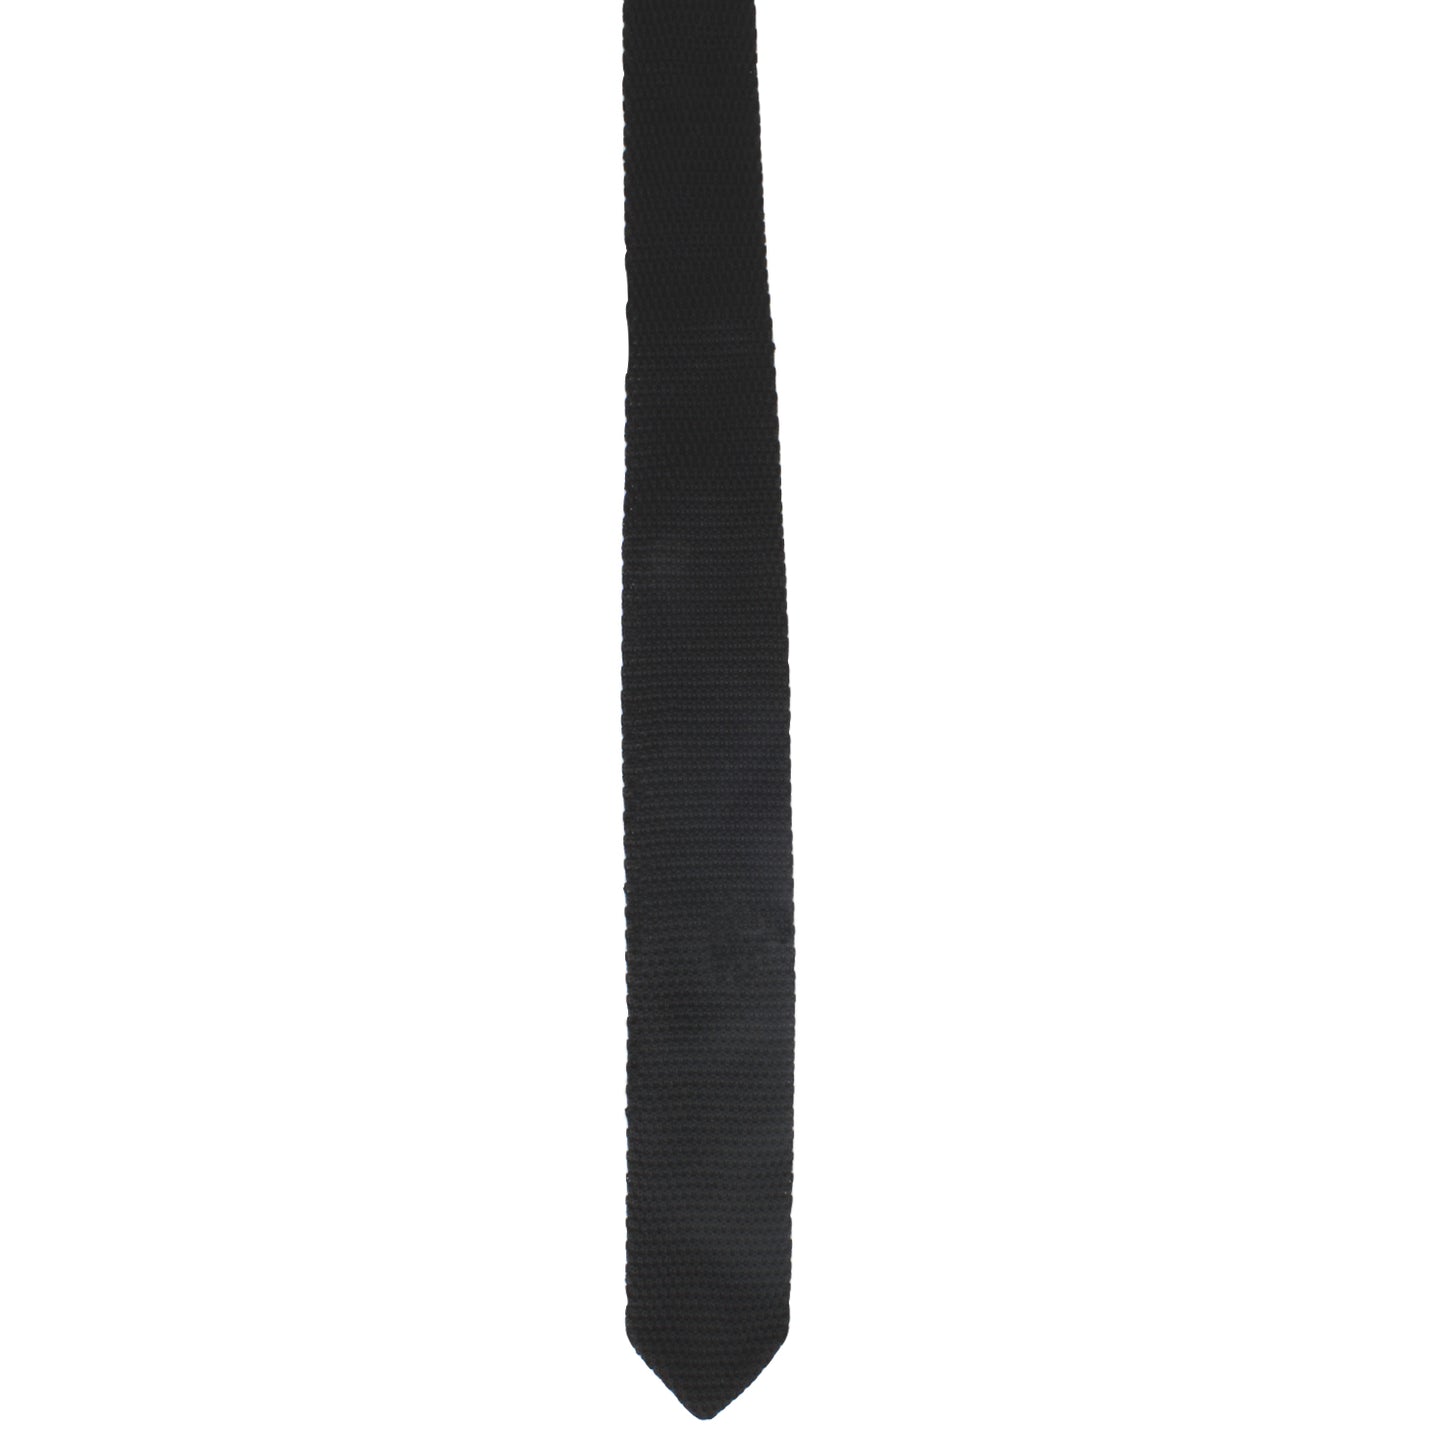 A Black Knitted Skinny Tie on a white background exuding elegance.